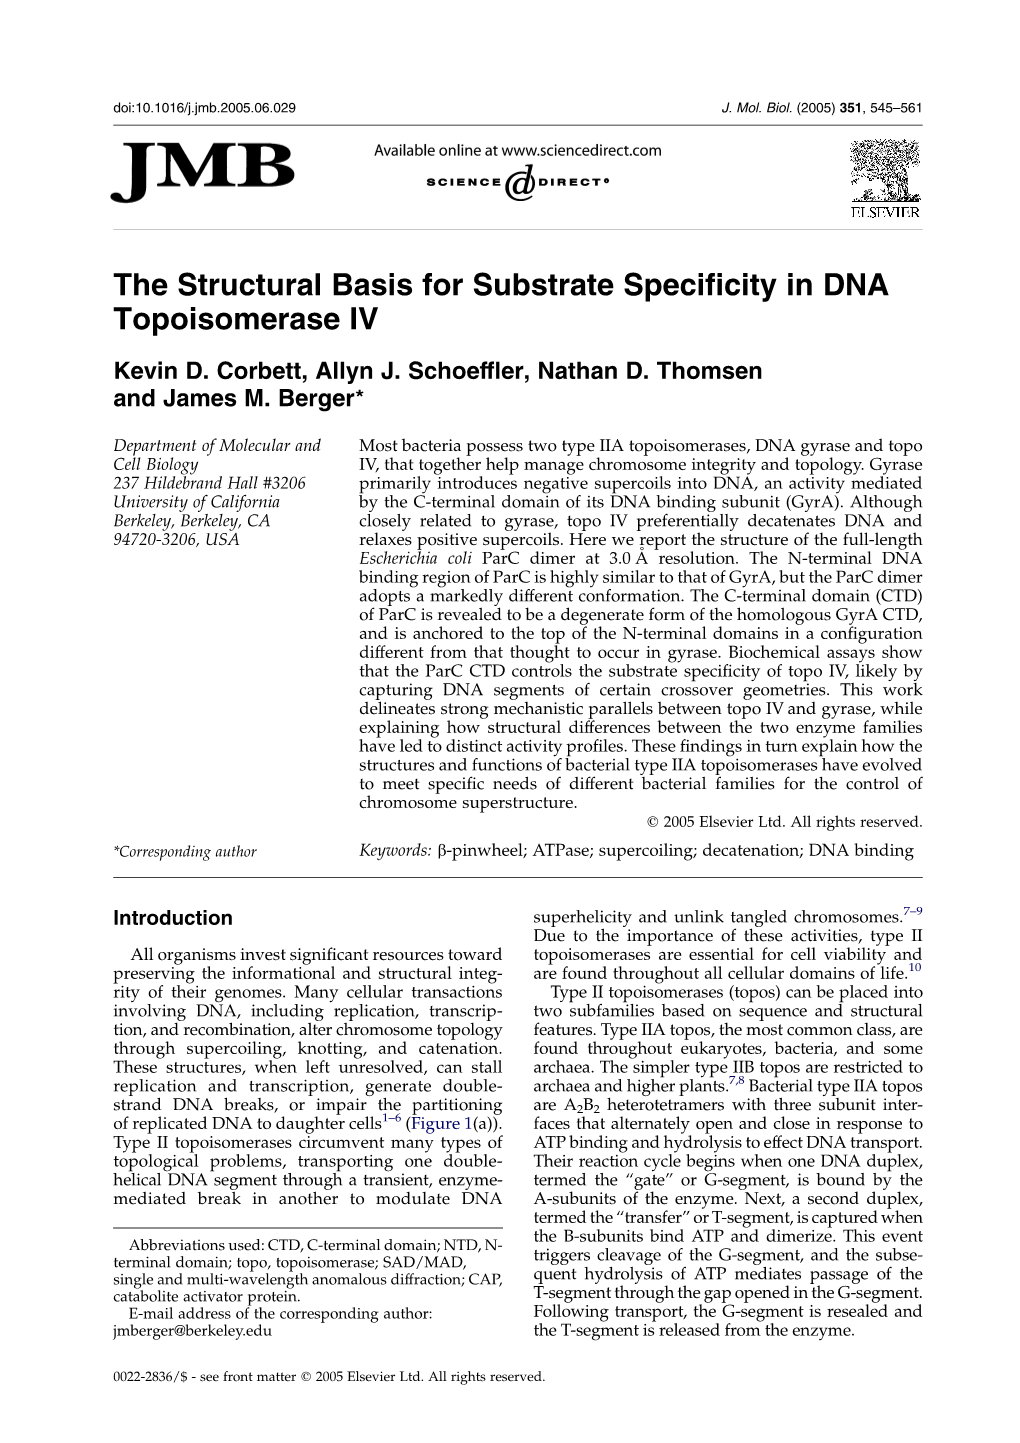 The Structural Basis for Substrate Specificity in DNA Topoisomerase IV